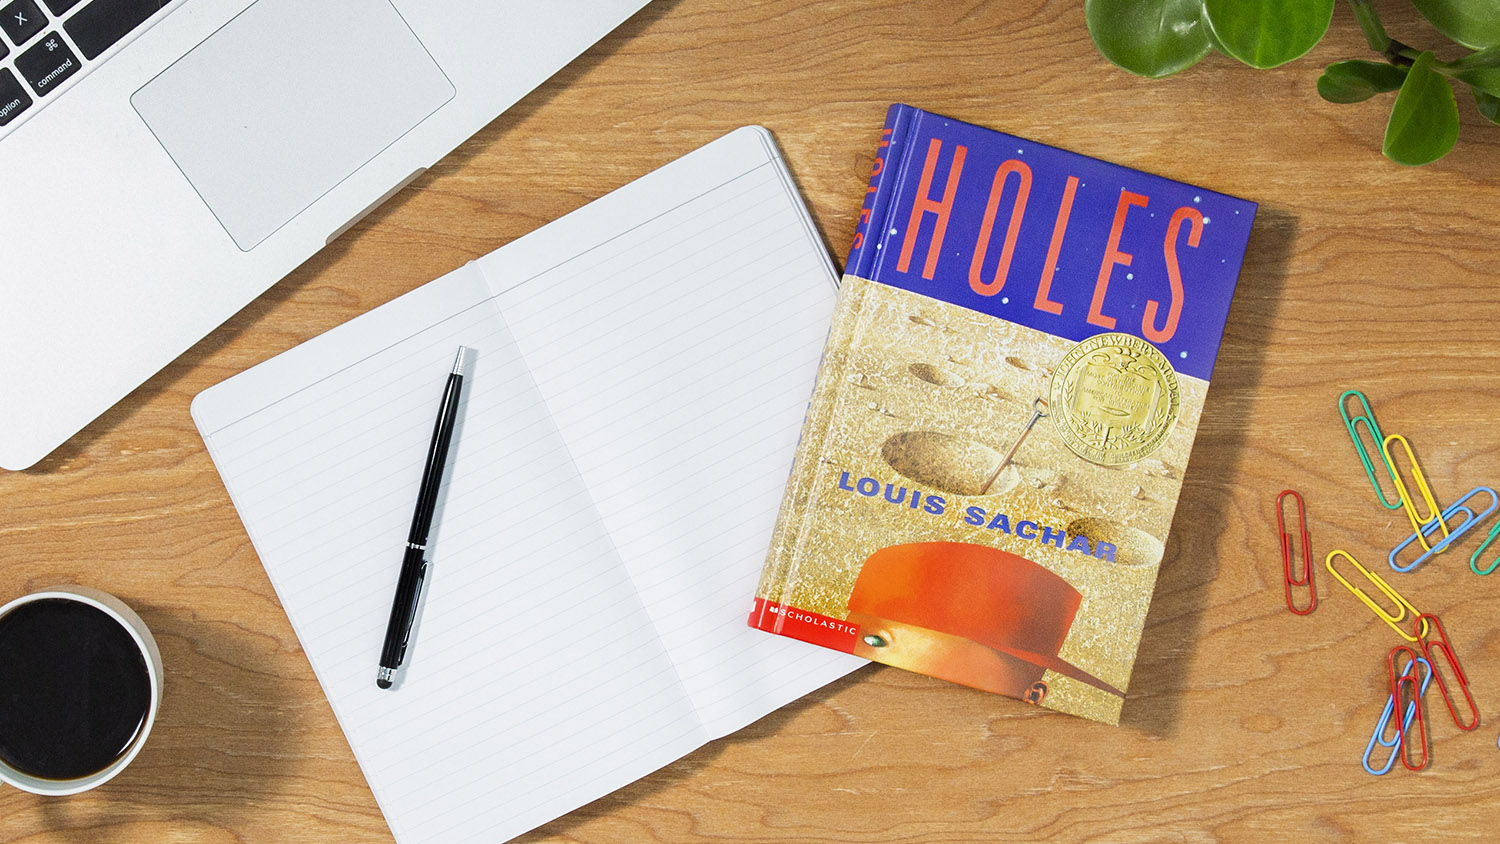 How to Teach Perseverance Using the Book Holes